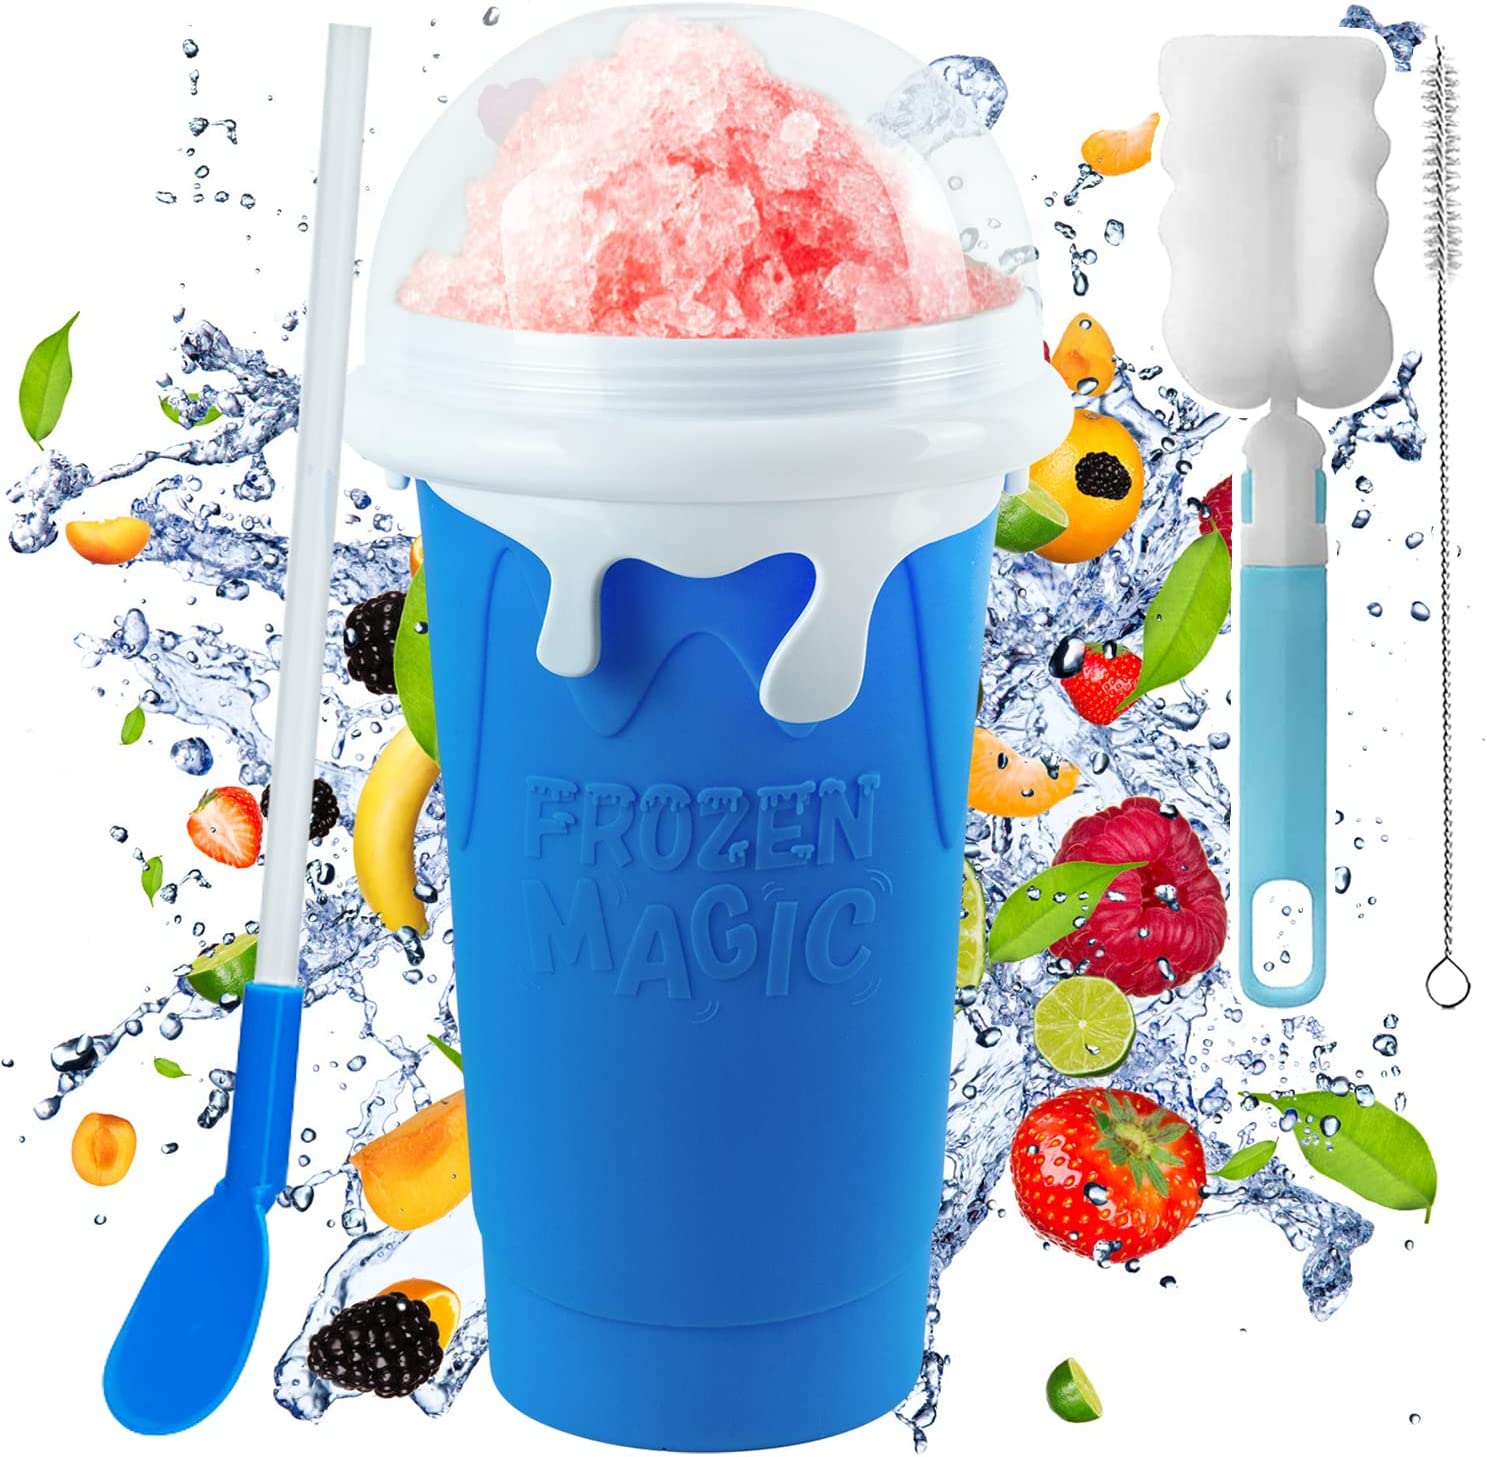 500 ml Slush Cup Silicone Squeeze Cup Slush Ice Cream Cup for Kneading Reusable Portable Quick Frozen Smoothies Cup with Straw Spoon for Delicious Slush Ice Cream for Children and Family